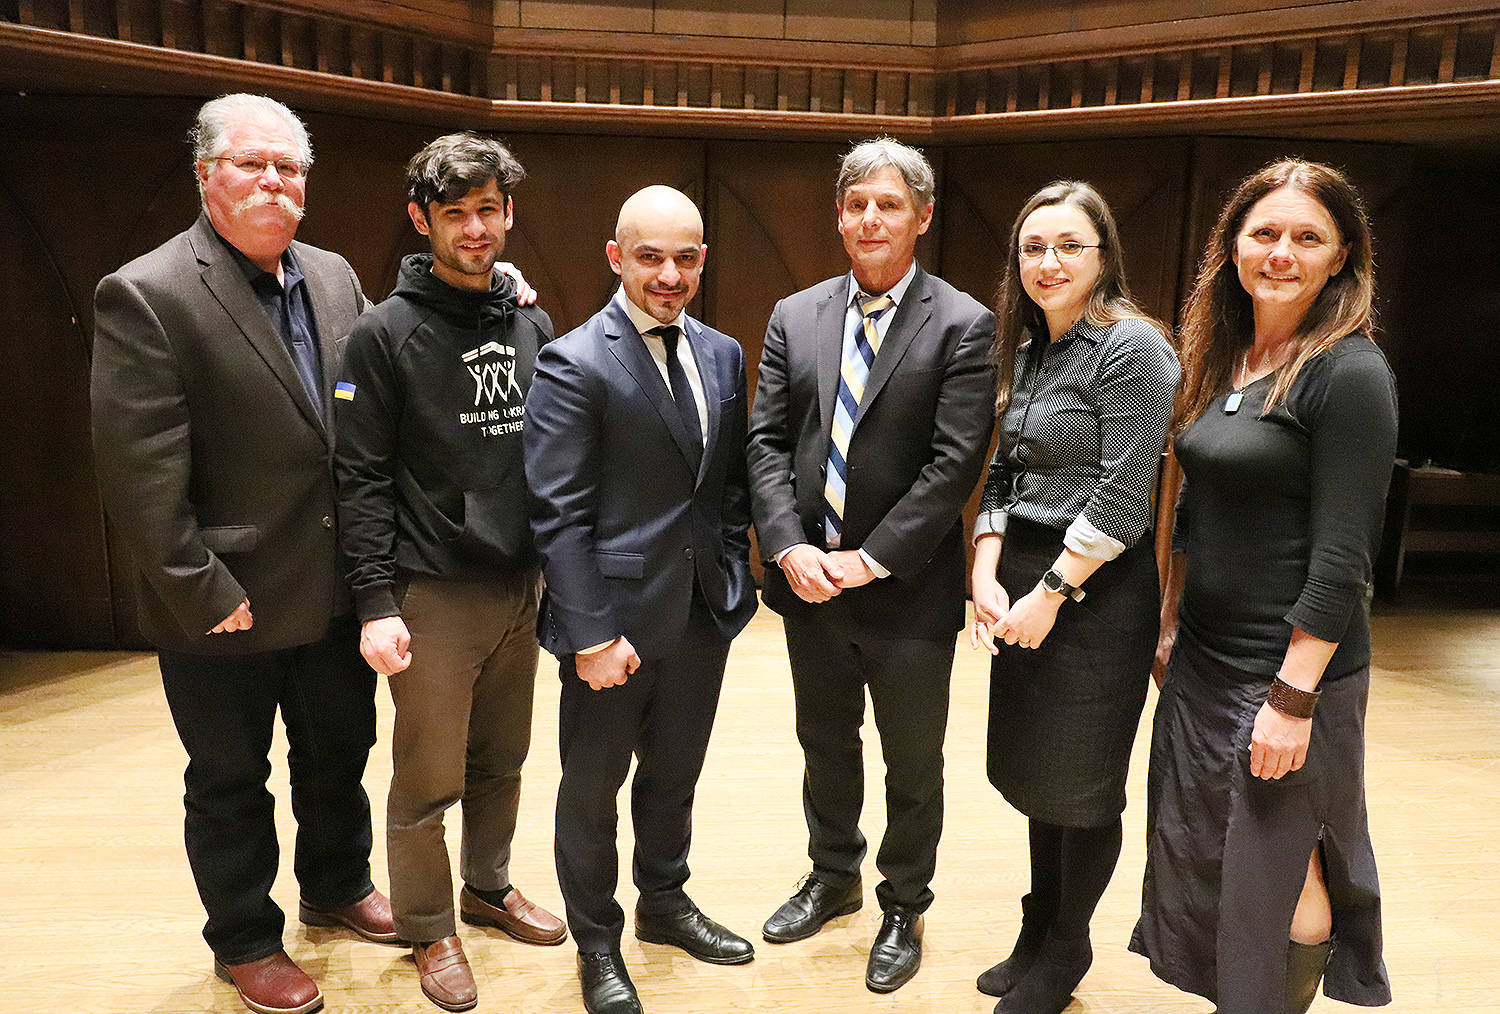 Pictured from left are Barry Chernoff, director of the College of the Environment; Yurko Didula, Mustafa Nayyem, Daniel Hryhorczuk, event moderator Olena Lennon and Katja Kolcio. Lennon is an adjunct professor of political science at the University of New Haven. 